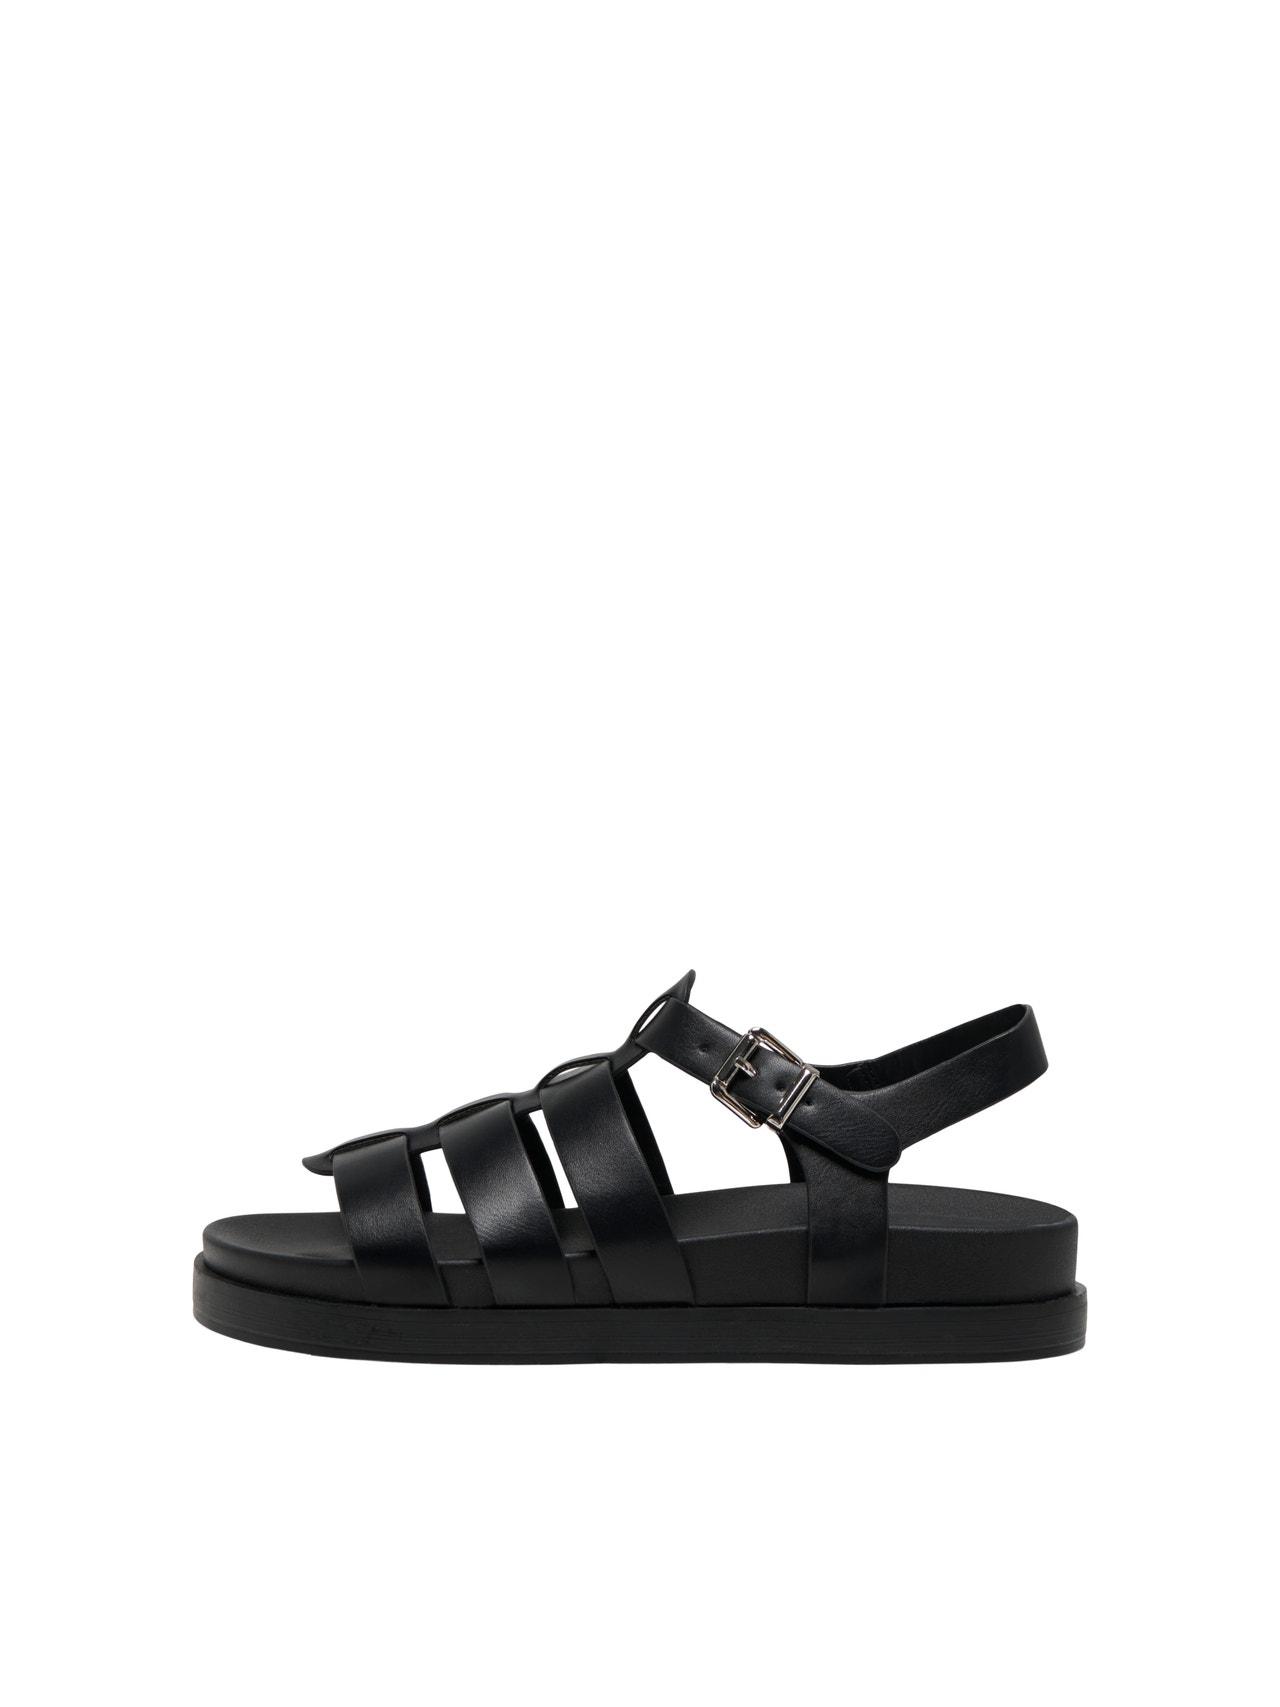 ONLY Faux leather sandals -Black - 15298258